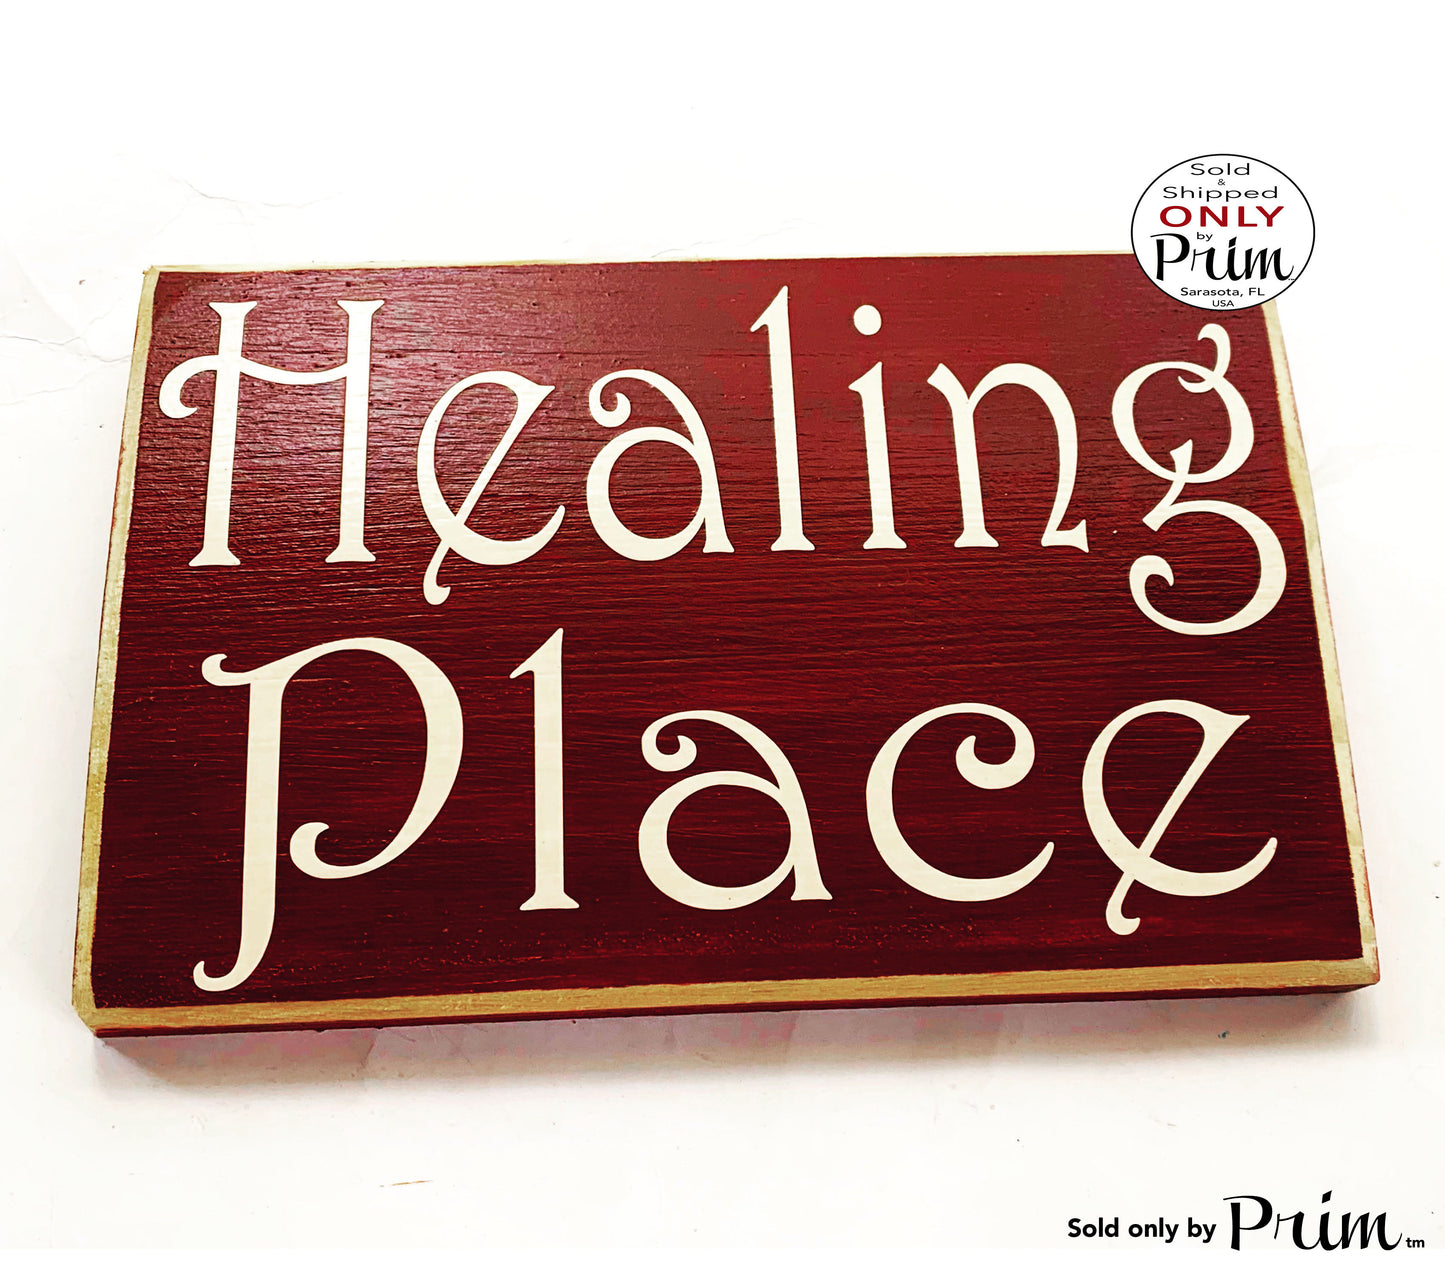 8x6 Healing Place Custom Wood Door Sign In Progress Session Do Not Disturb Spa Salon Yoga Welcome Meditation Pilates Office Pure Positive 